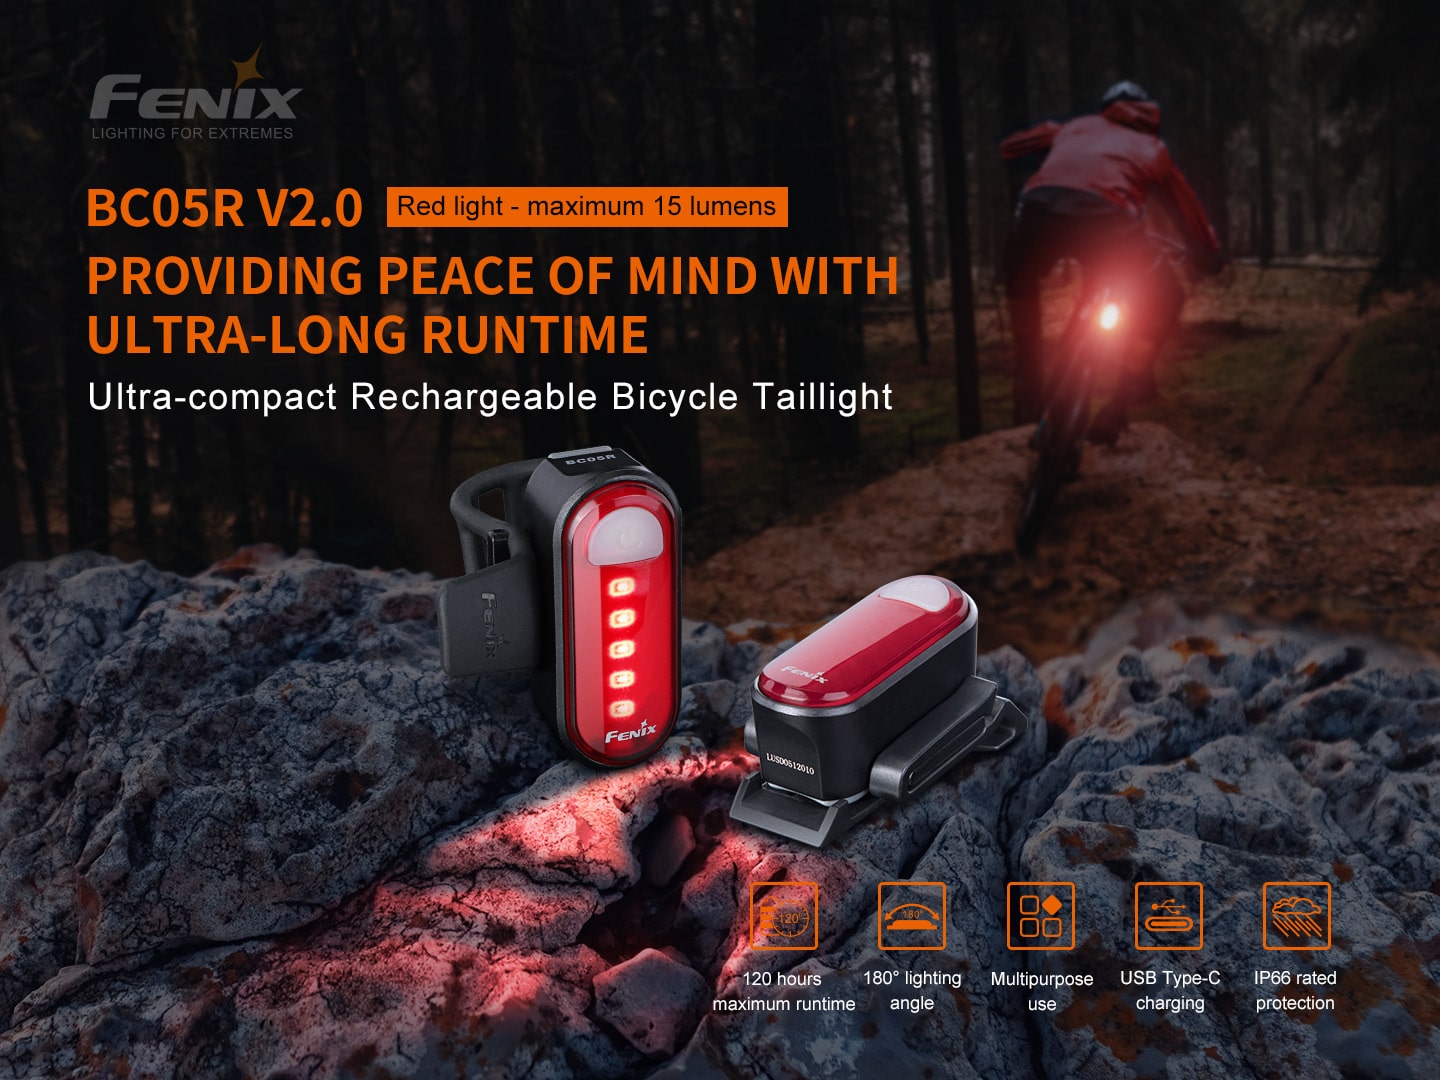 Fenix BC05R V2.0 Rechargeable Bicycle Tail Light 15 Lumens and beam distance of 50 meters